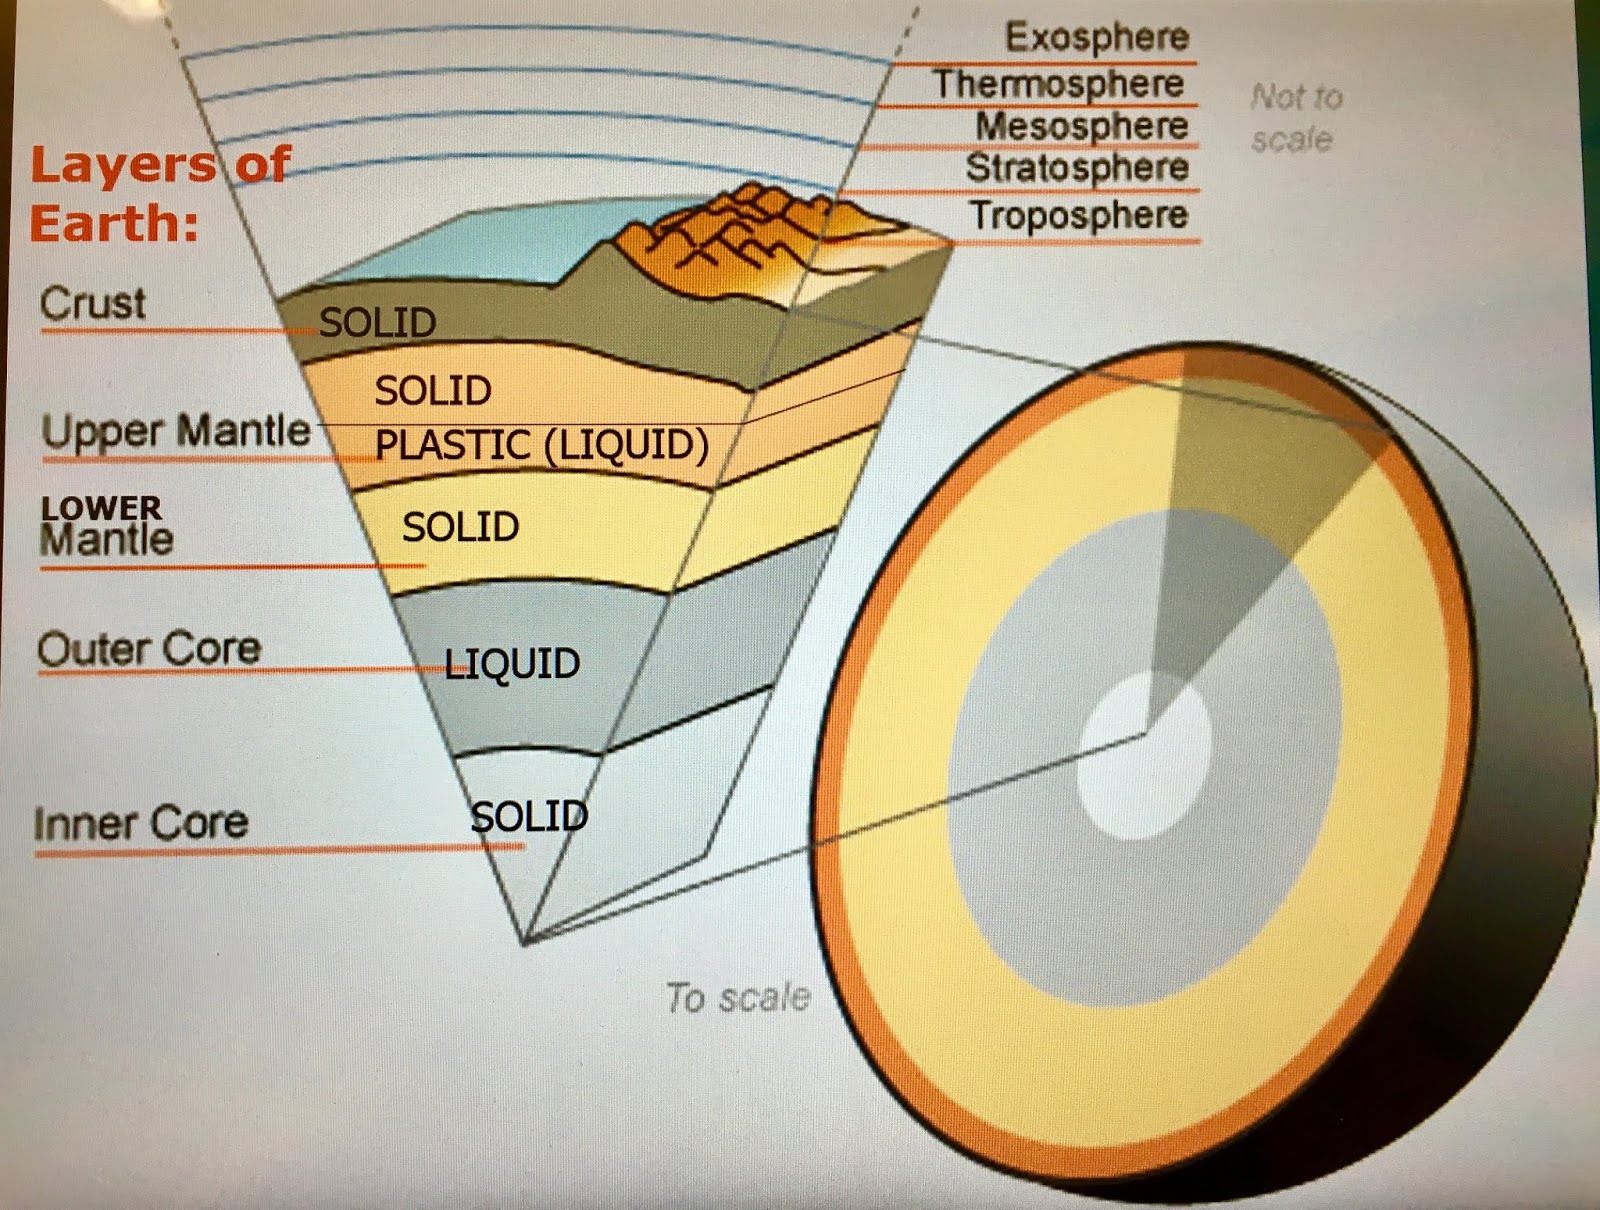 What Are The Characteristics Of The Asthenosphere? 